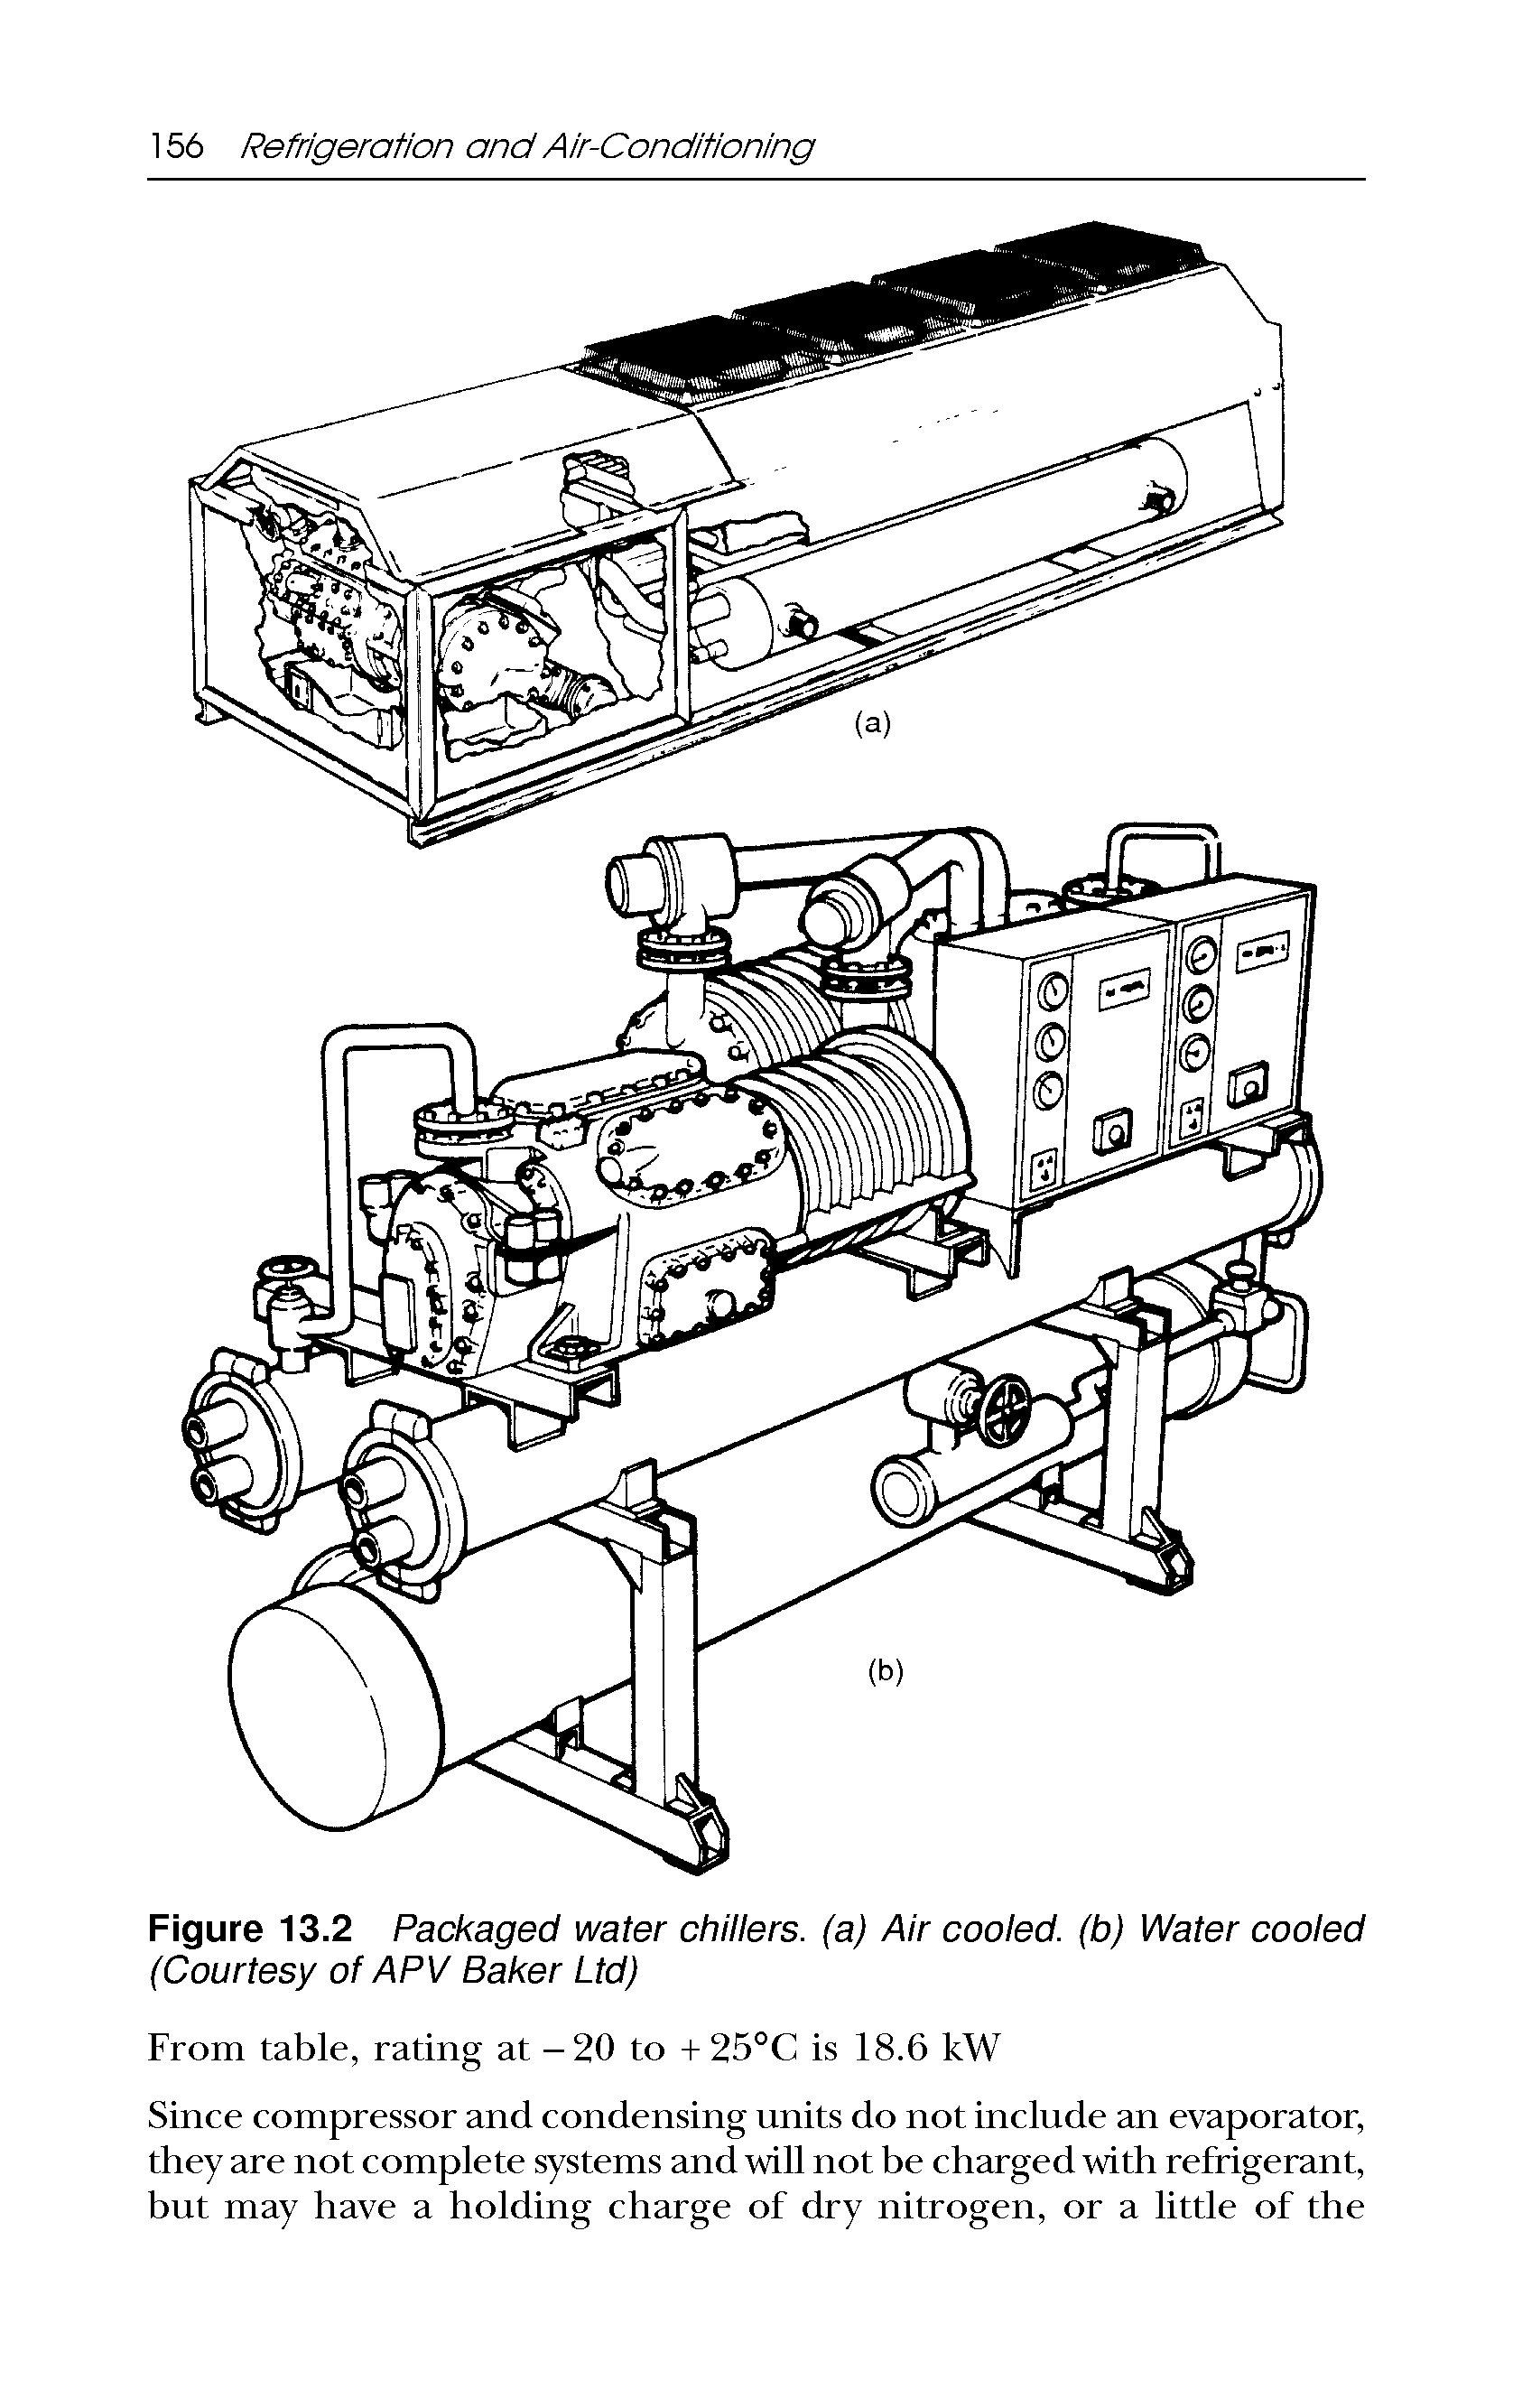 Figure 13.2 Packaged water chillers, (a) Air cooled, (b) Water cooled (Courtesy of APV Baker Ltd)...